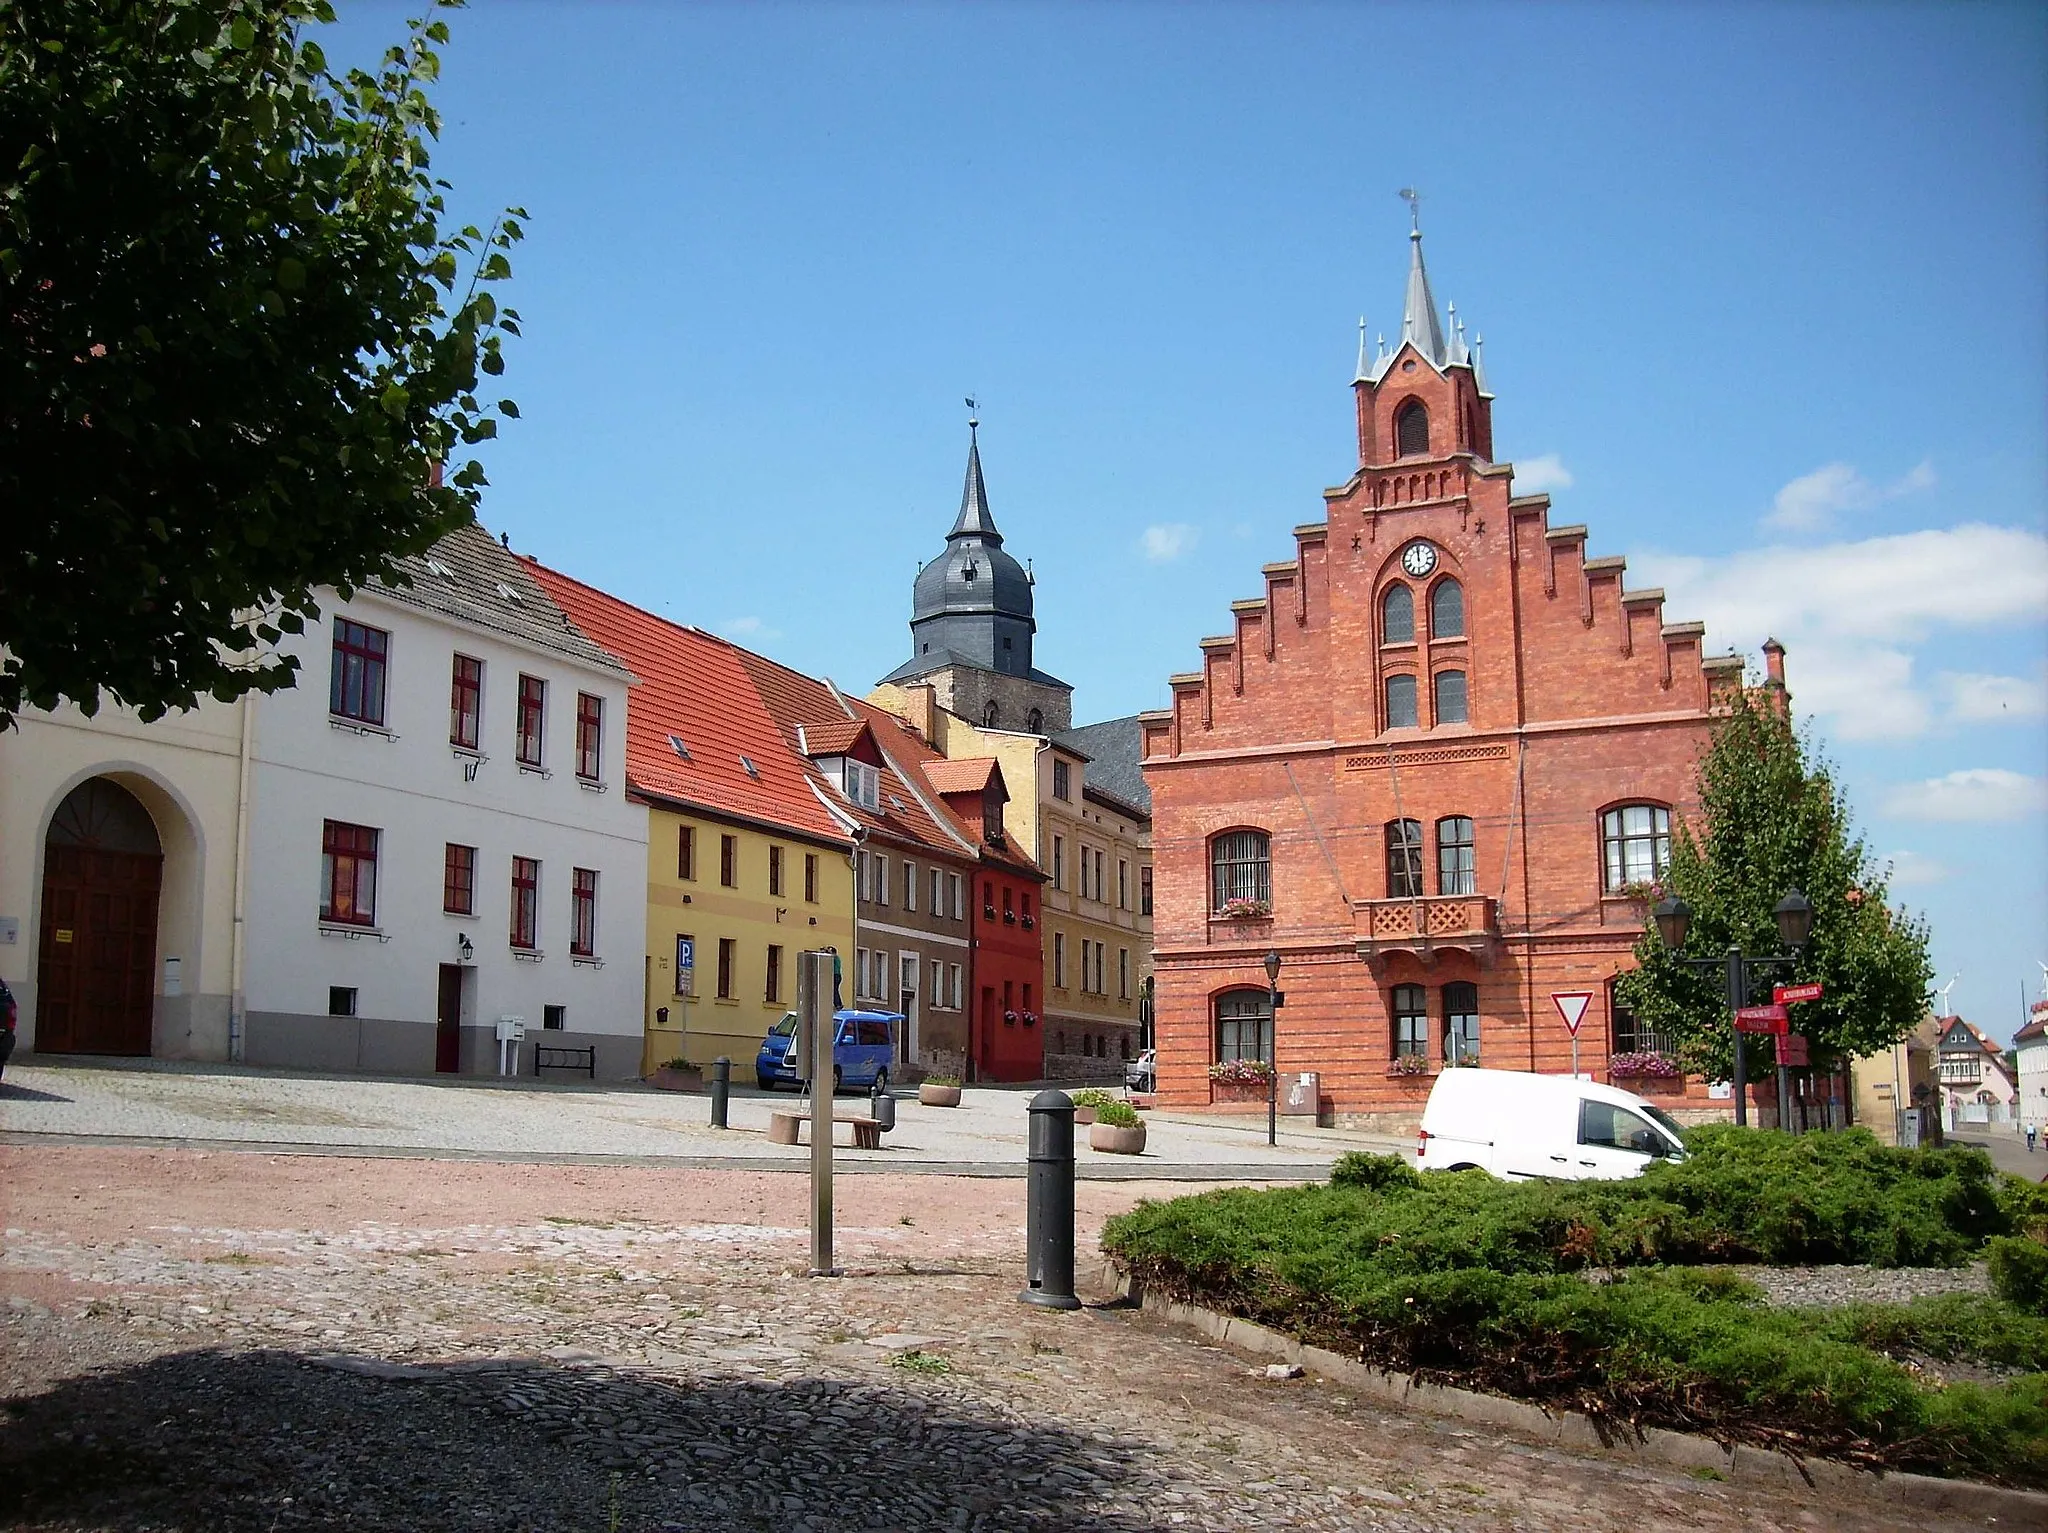 Photo showing: Market-square in Alsleben/Saale (district of Salzlandkreis, Saxony-Anhalt) with town hall and the steeple of the town's Lutheran church